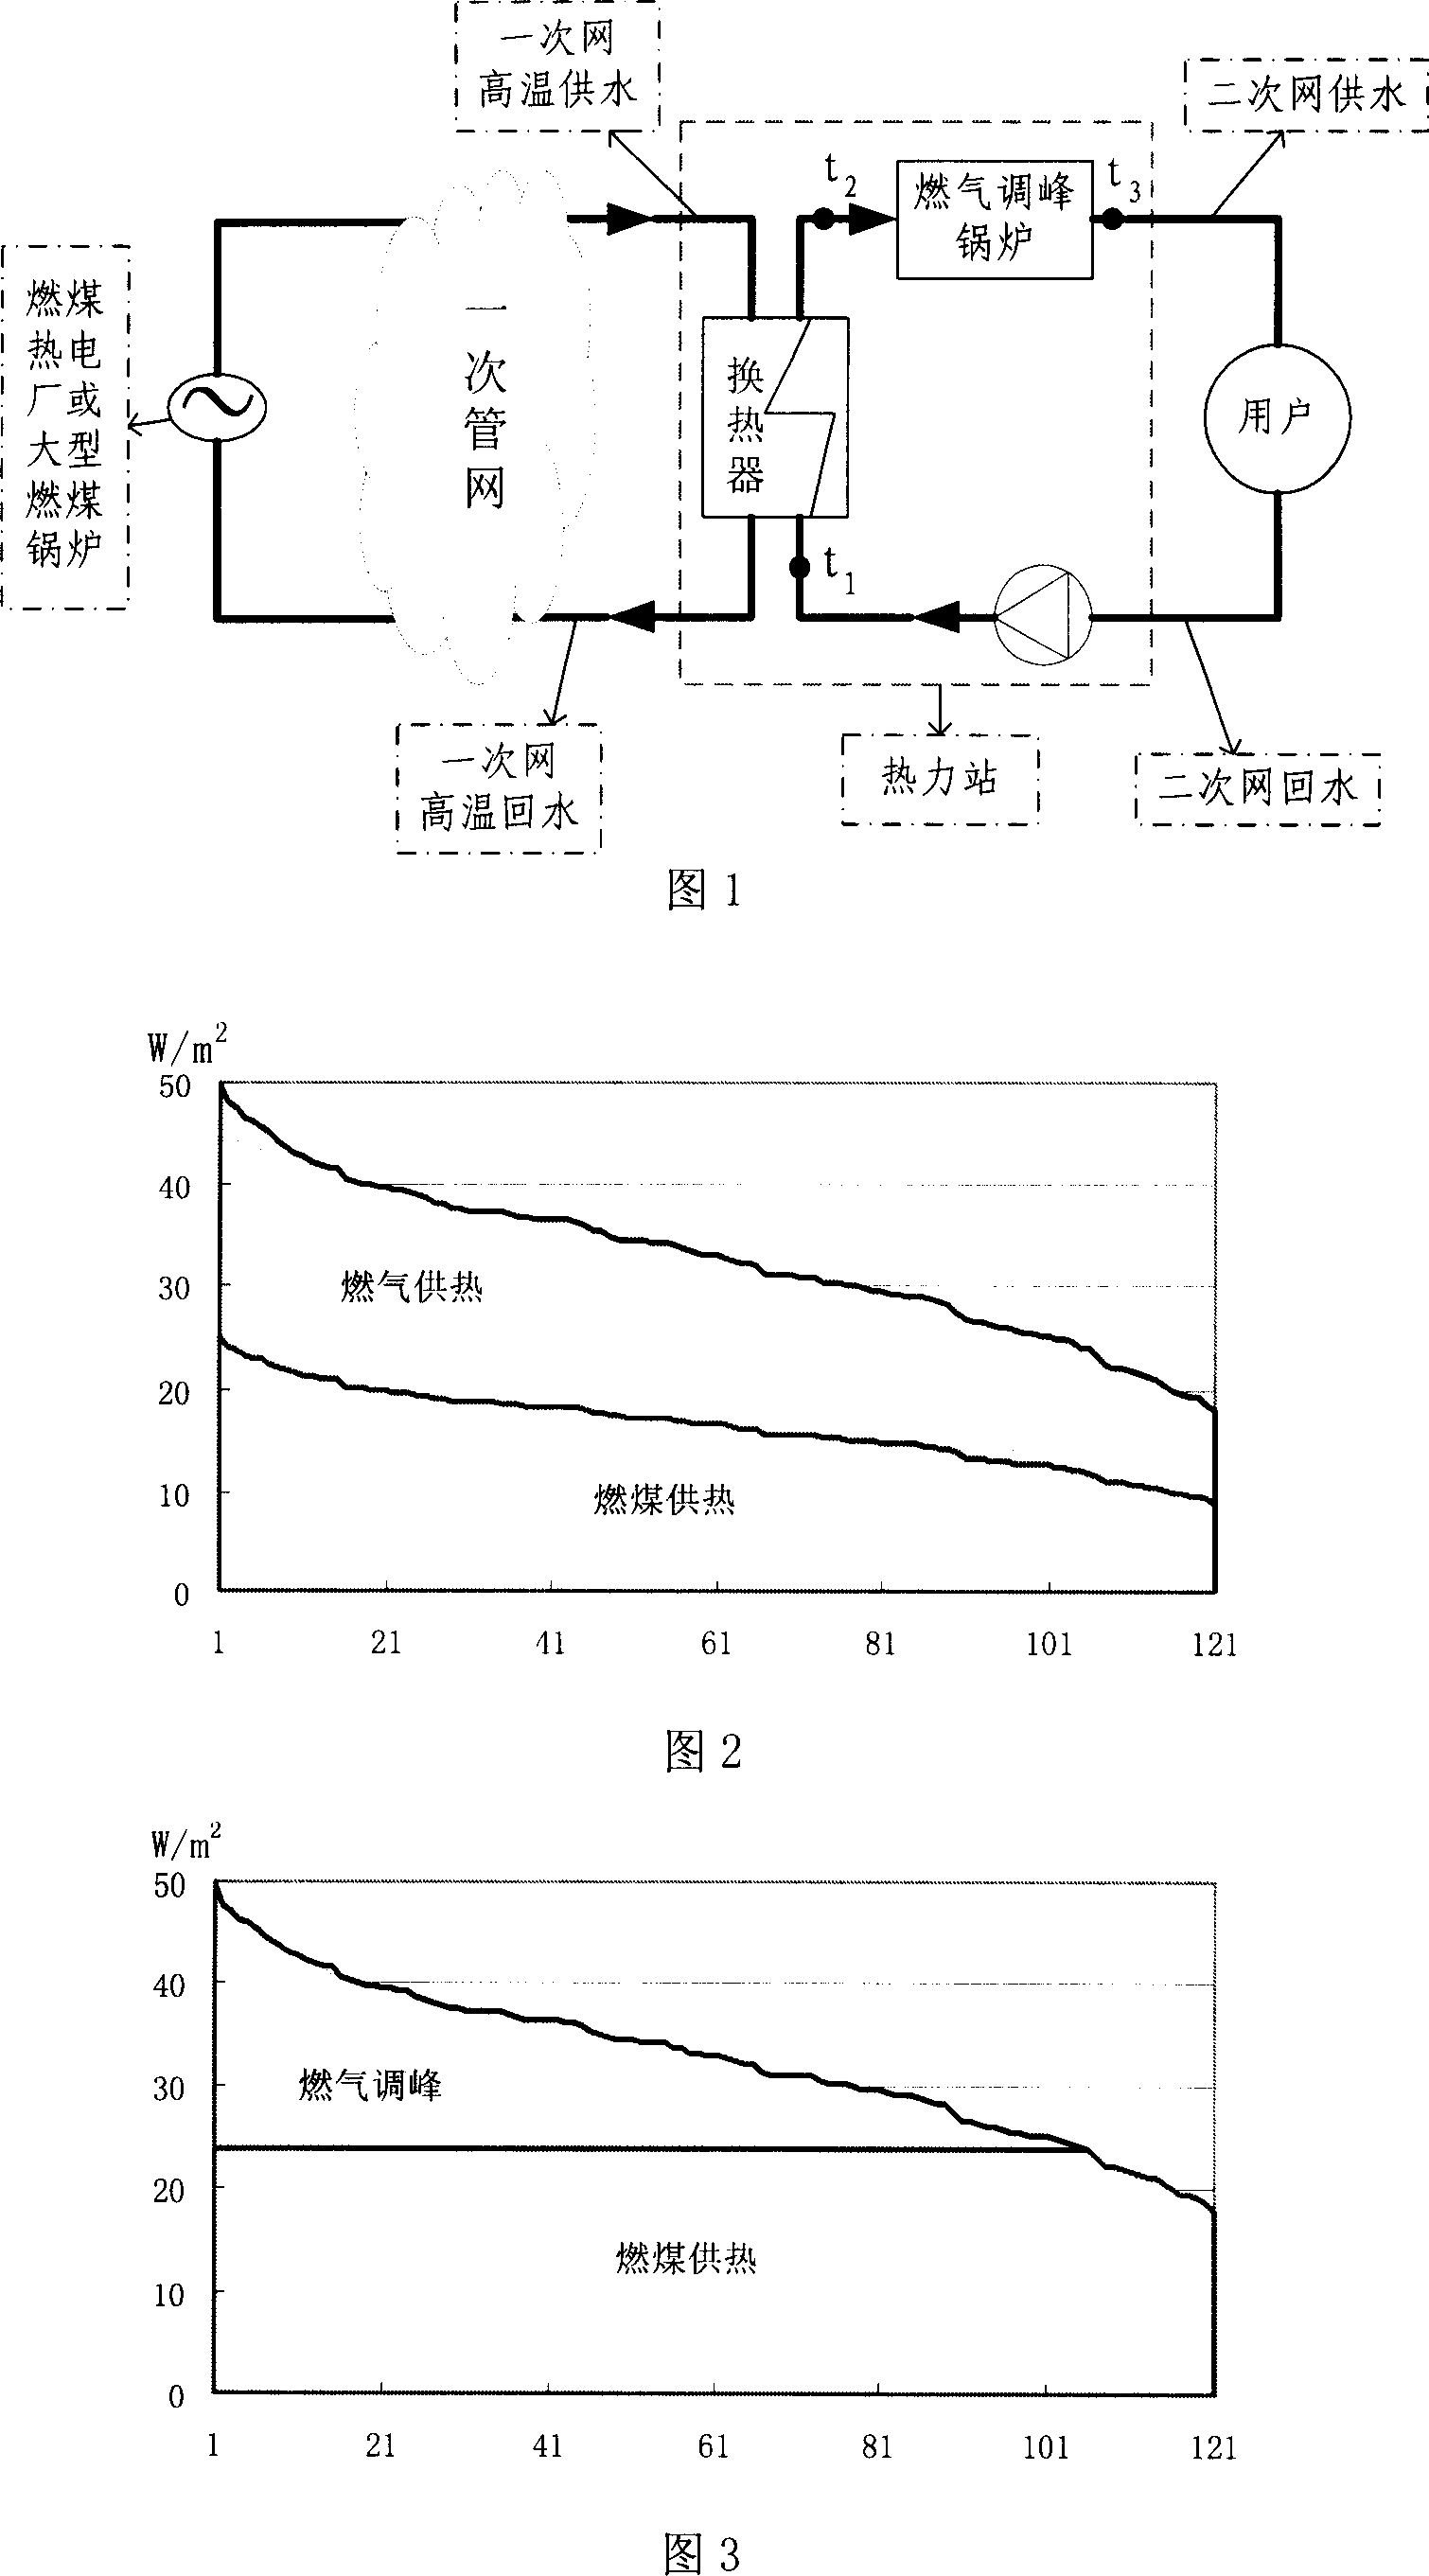 Fuel coal and fuel gas united heat supply method